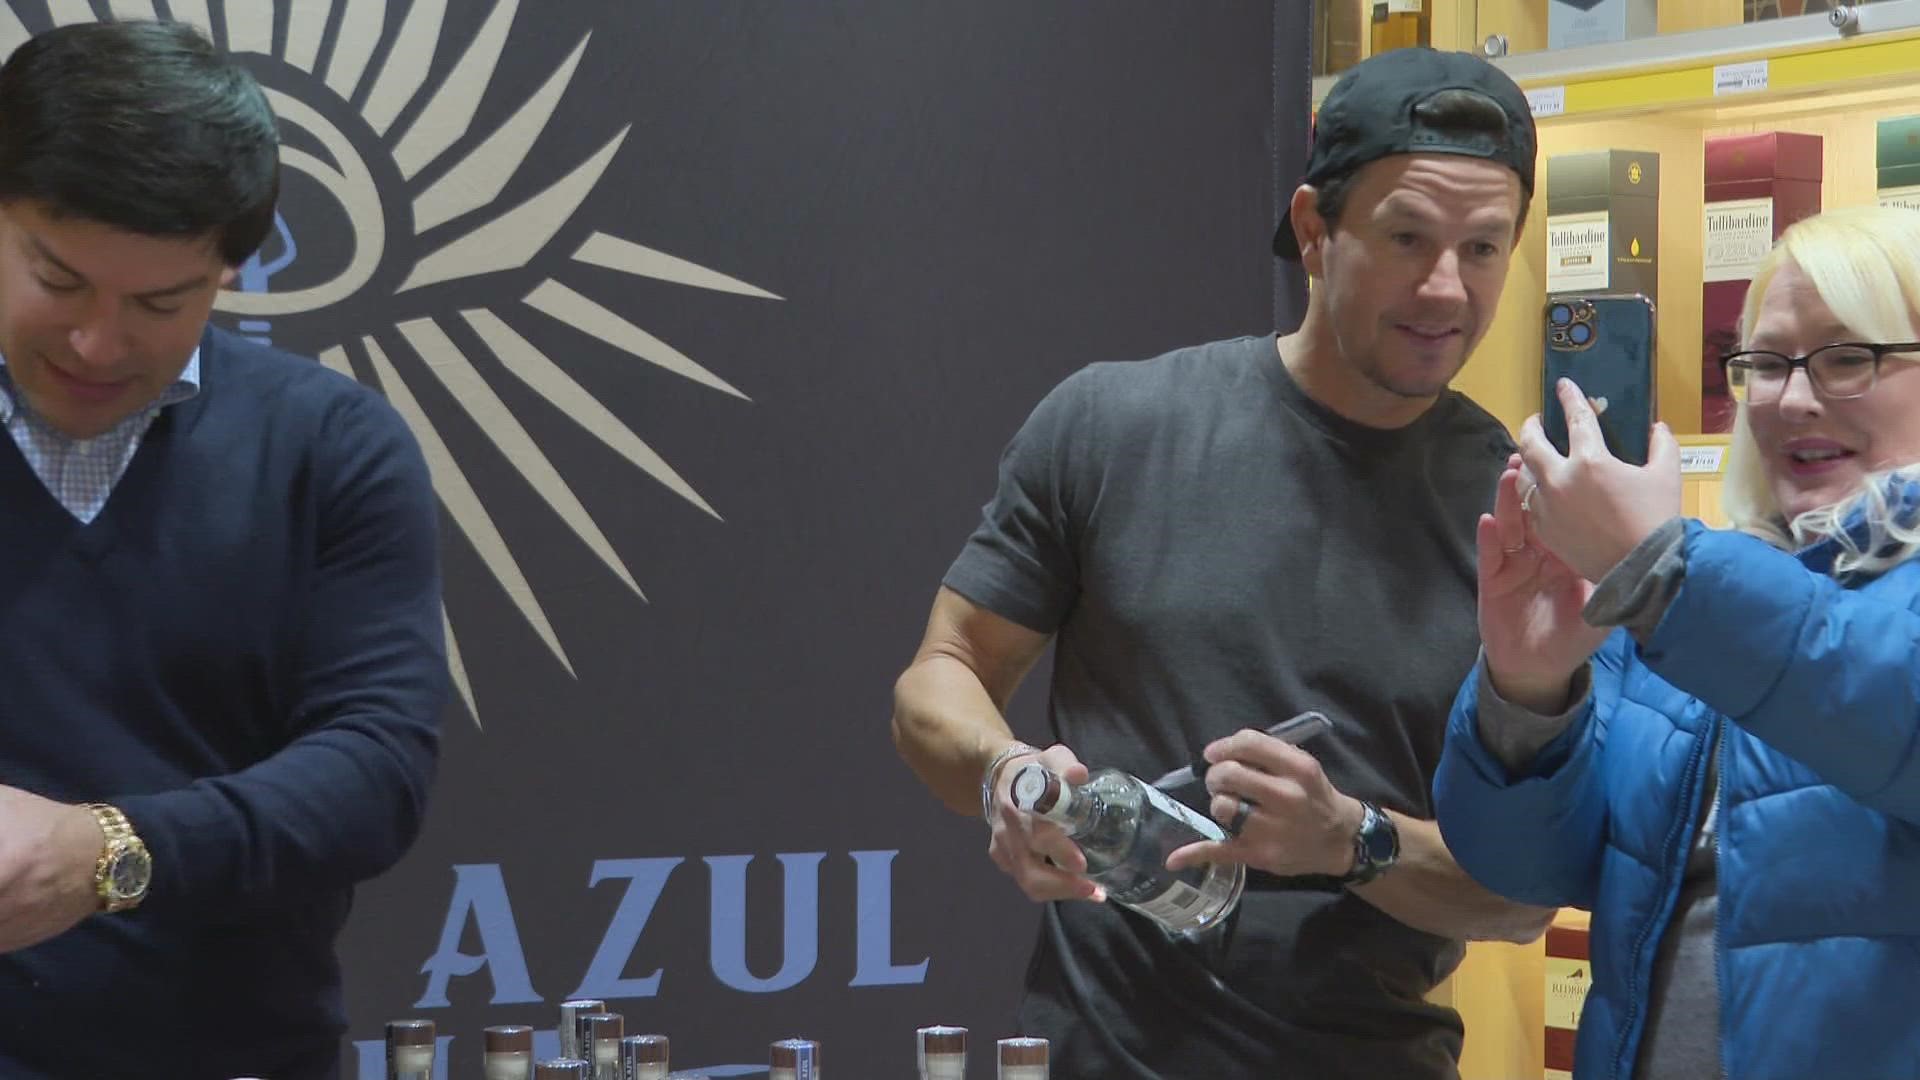 The actor was in Louisville on Saturday to promote his new tequila brand.